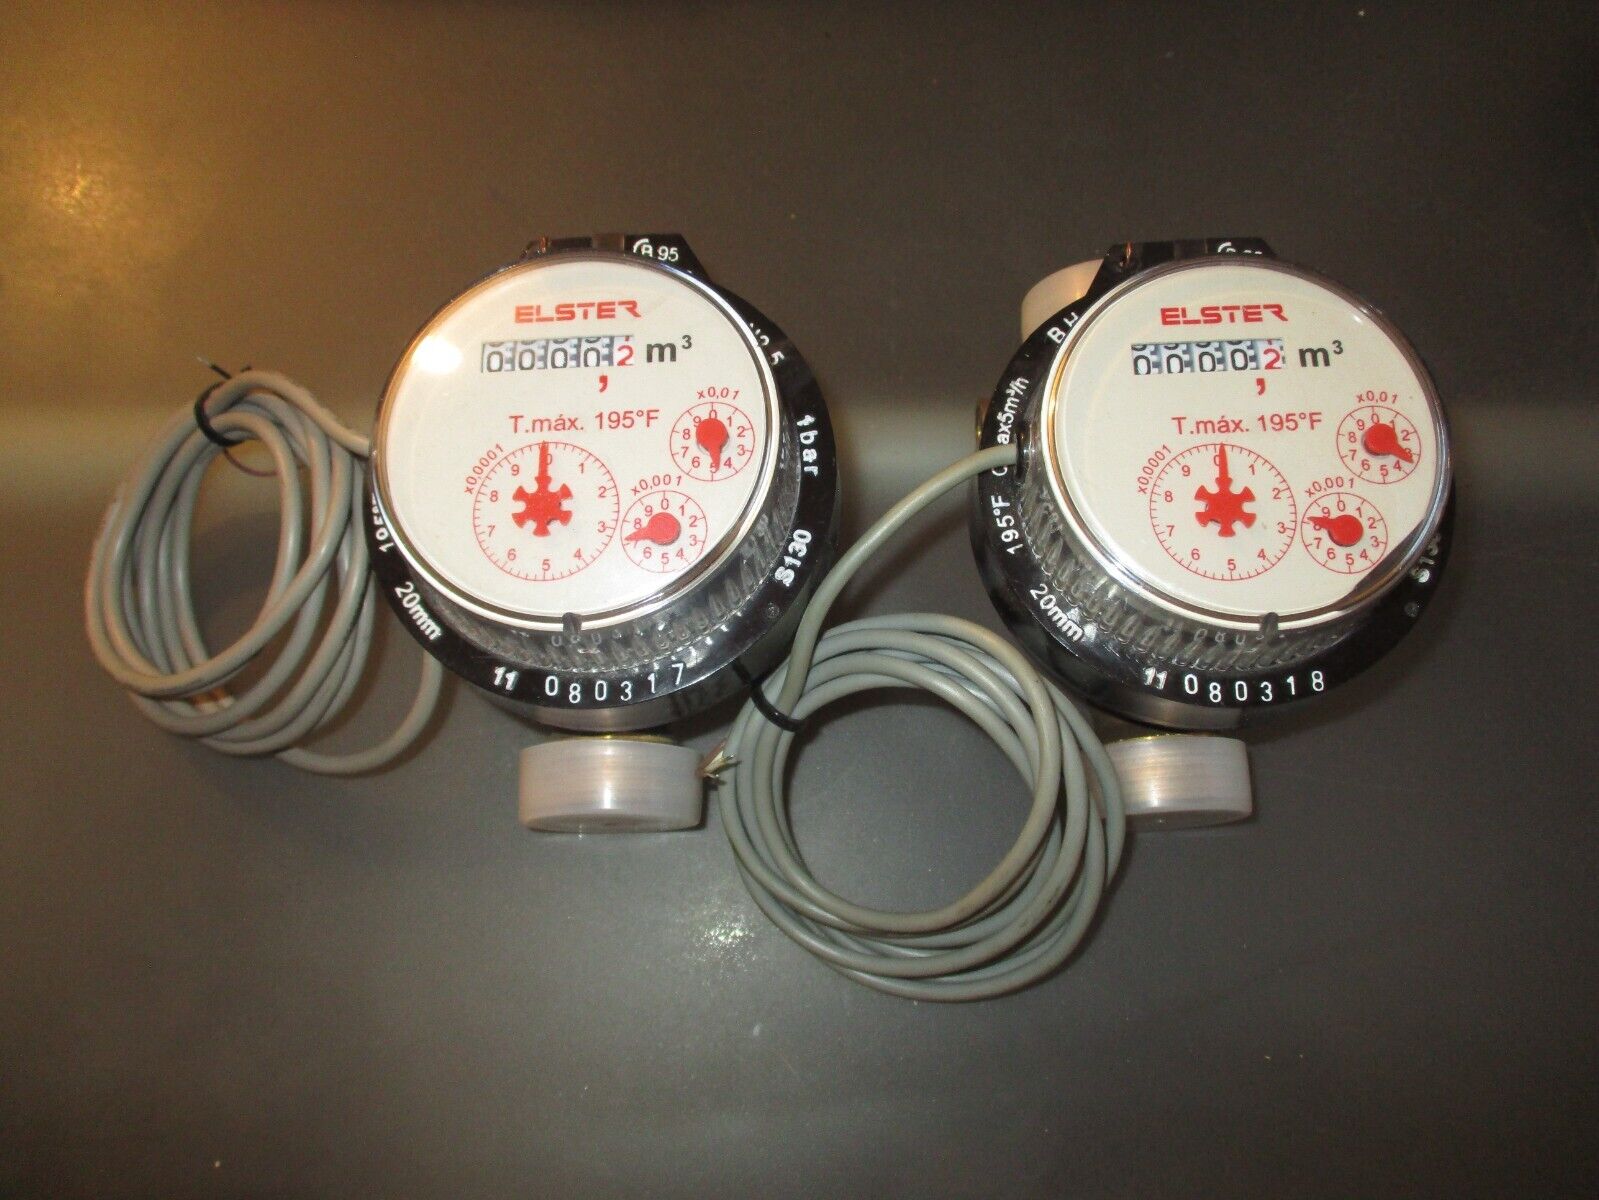 Elster Amco NEW S130 Water Meter Direct Read